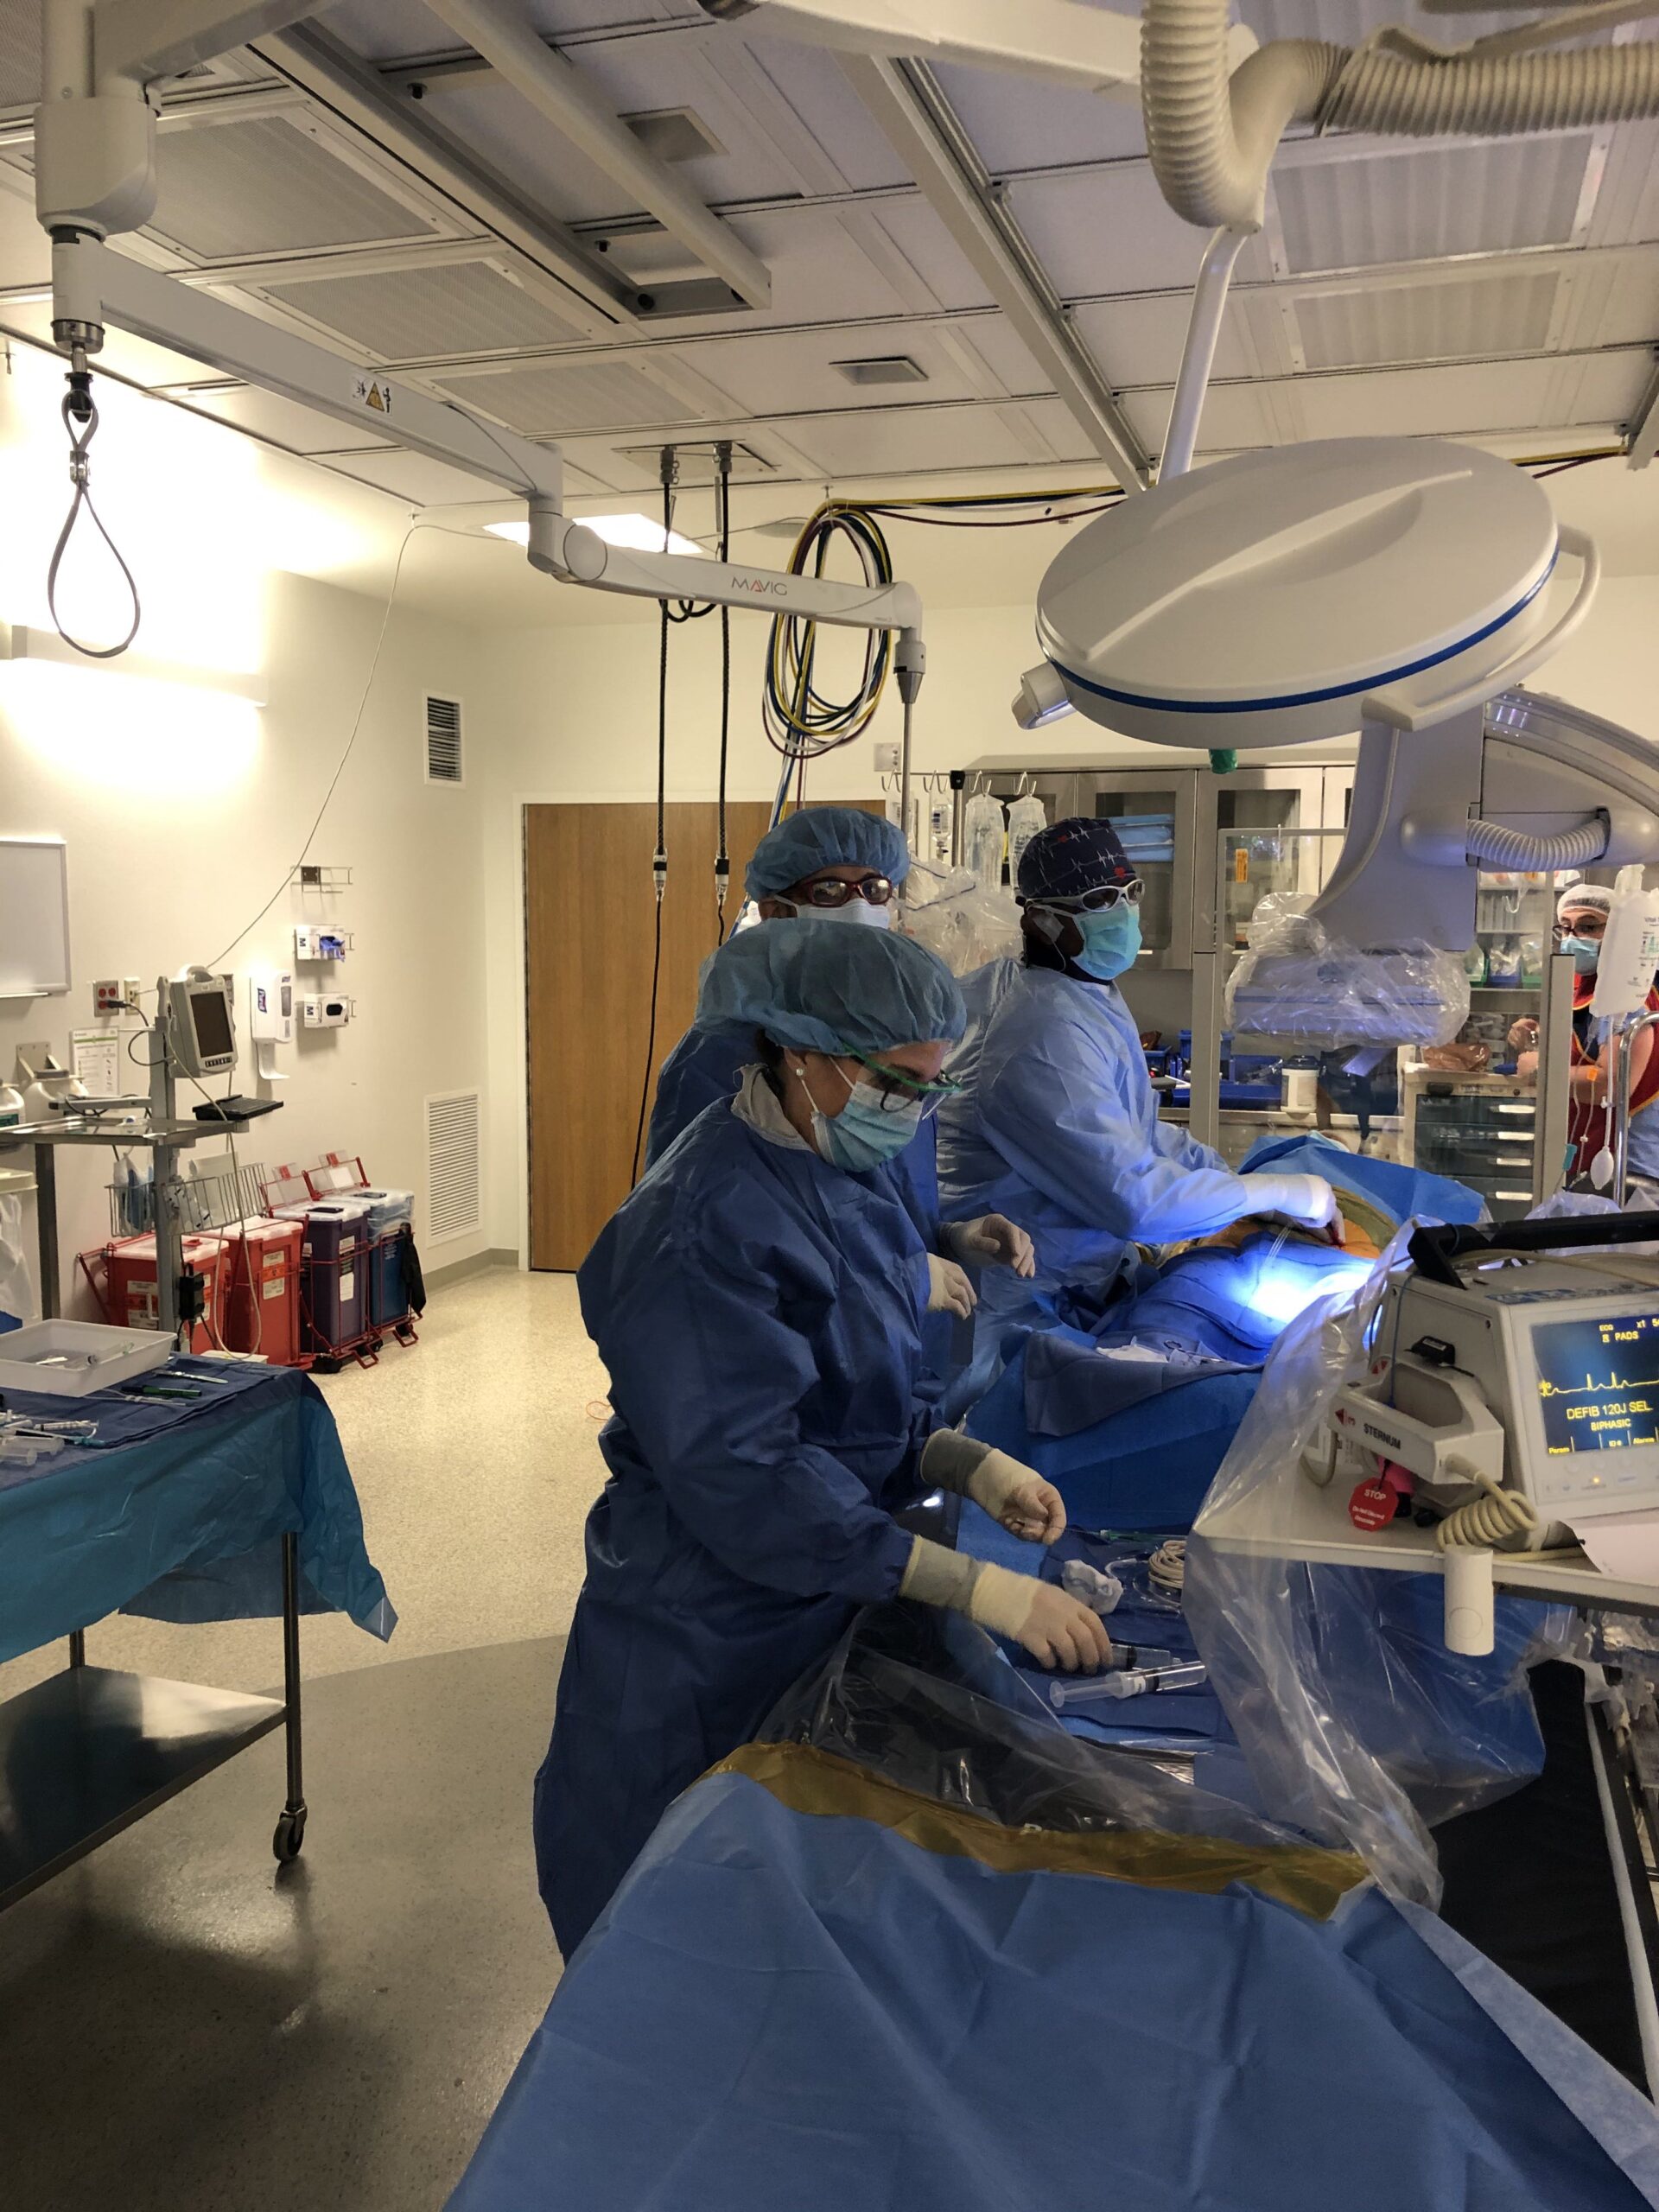 BGH – GVI Selected for Live Worldwide Synchronous TAVR Procedure